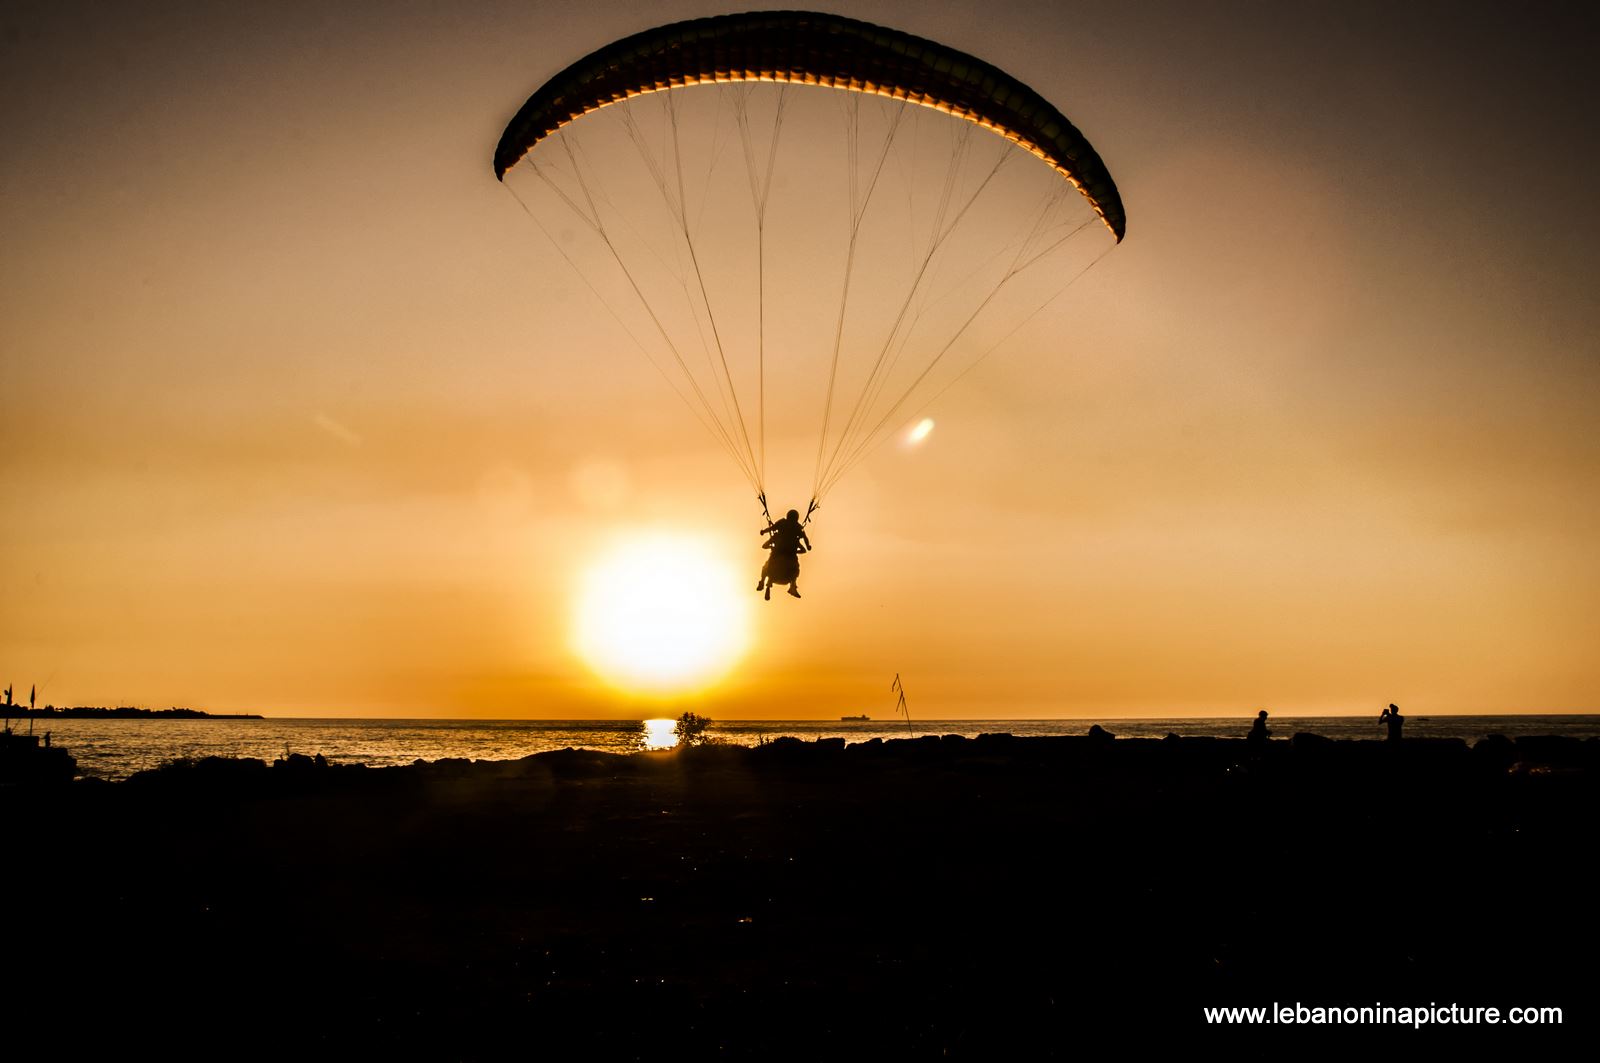 Paragliding from Ghosta Mountain and Landing in Maameltein Near Jounieh